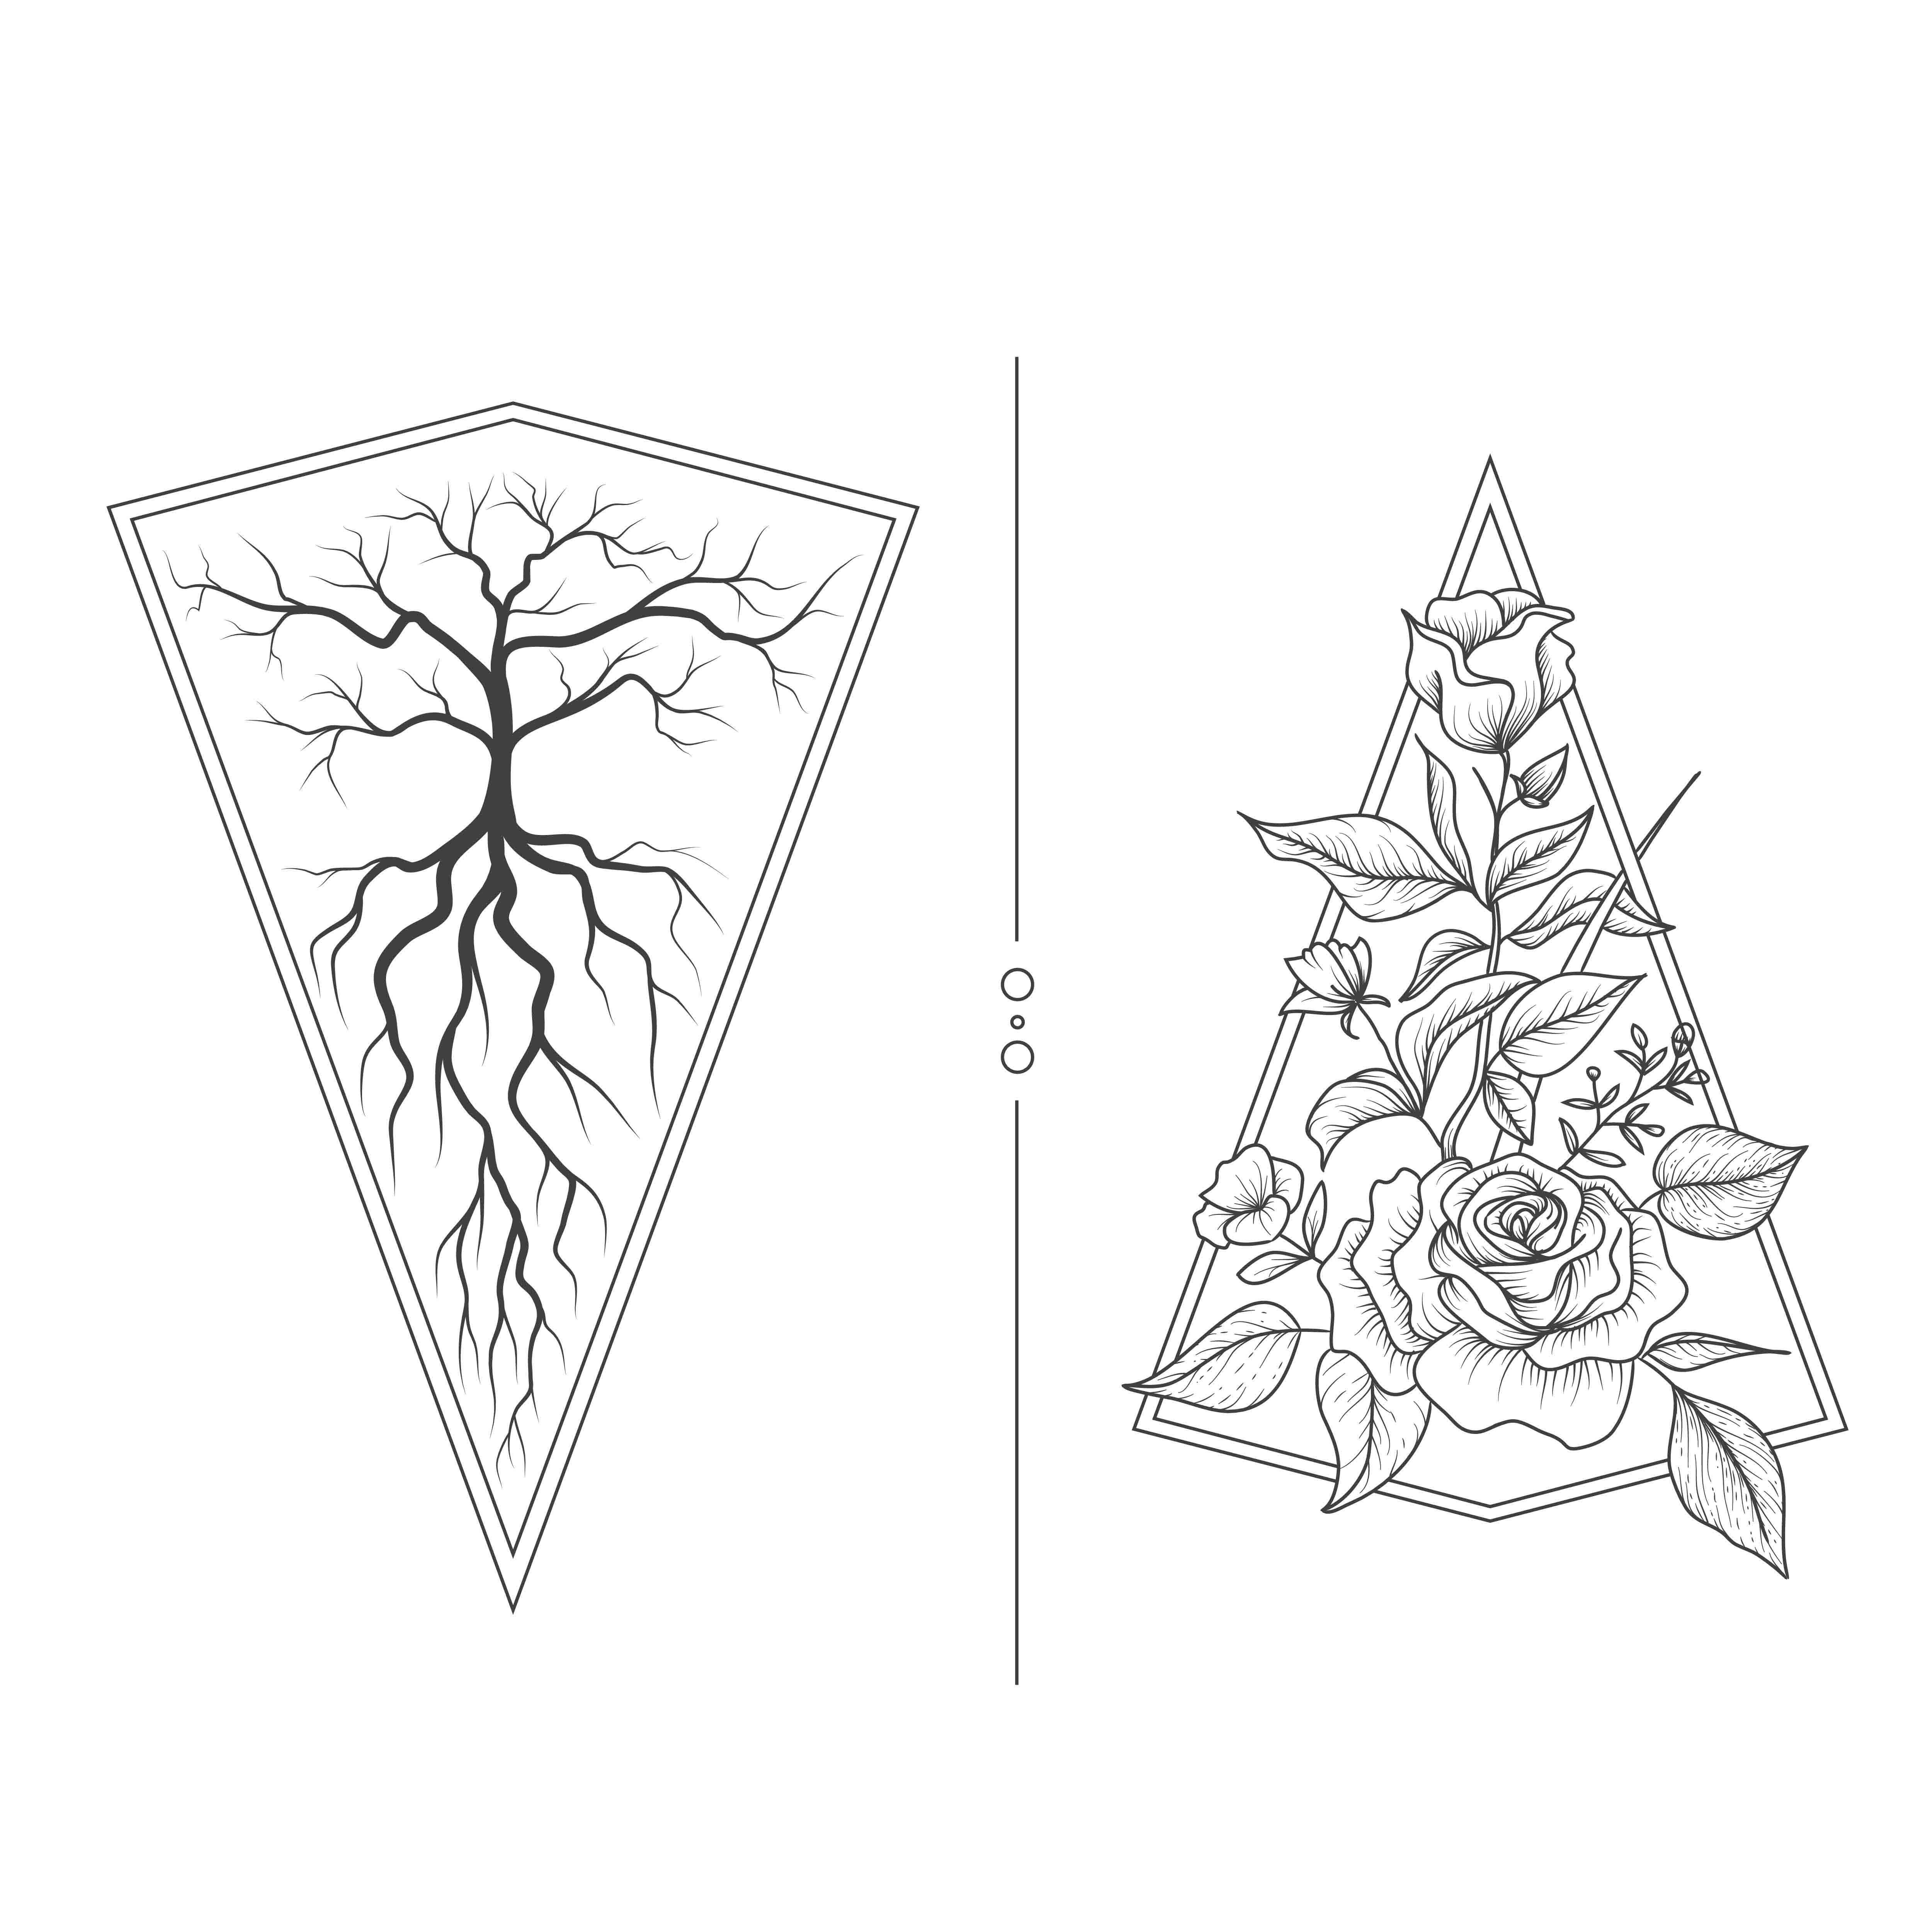 Some Tattoo Design again by MPtribe on DeviantArt  Free tattoo designs  Simple tattoo designs Cool simple tattoos